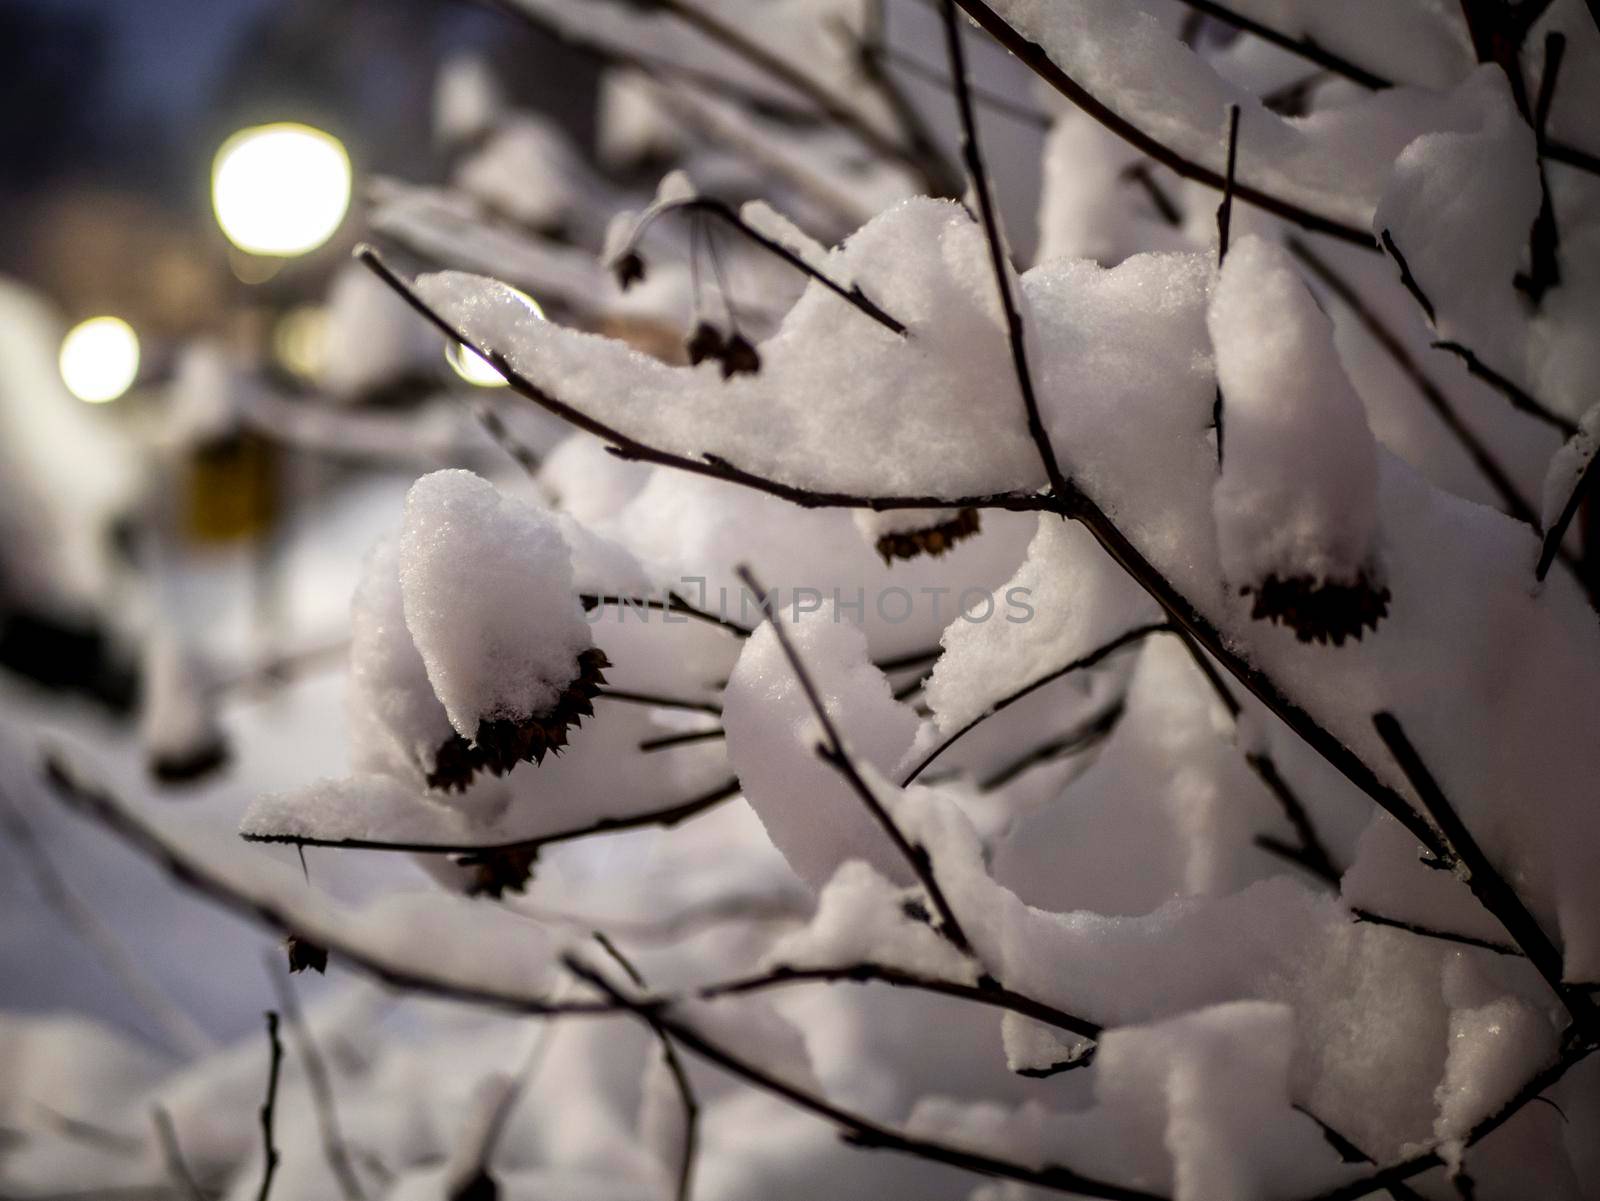 A snow-covered branch. Beautiful winter landscape with snow-covered trees. close up by lempro